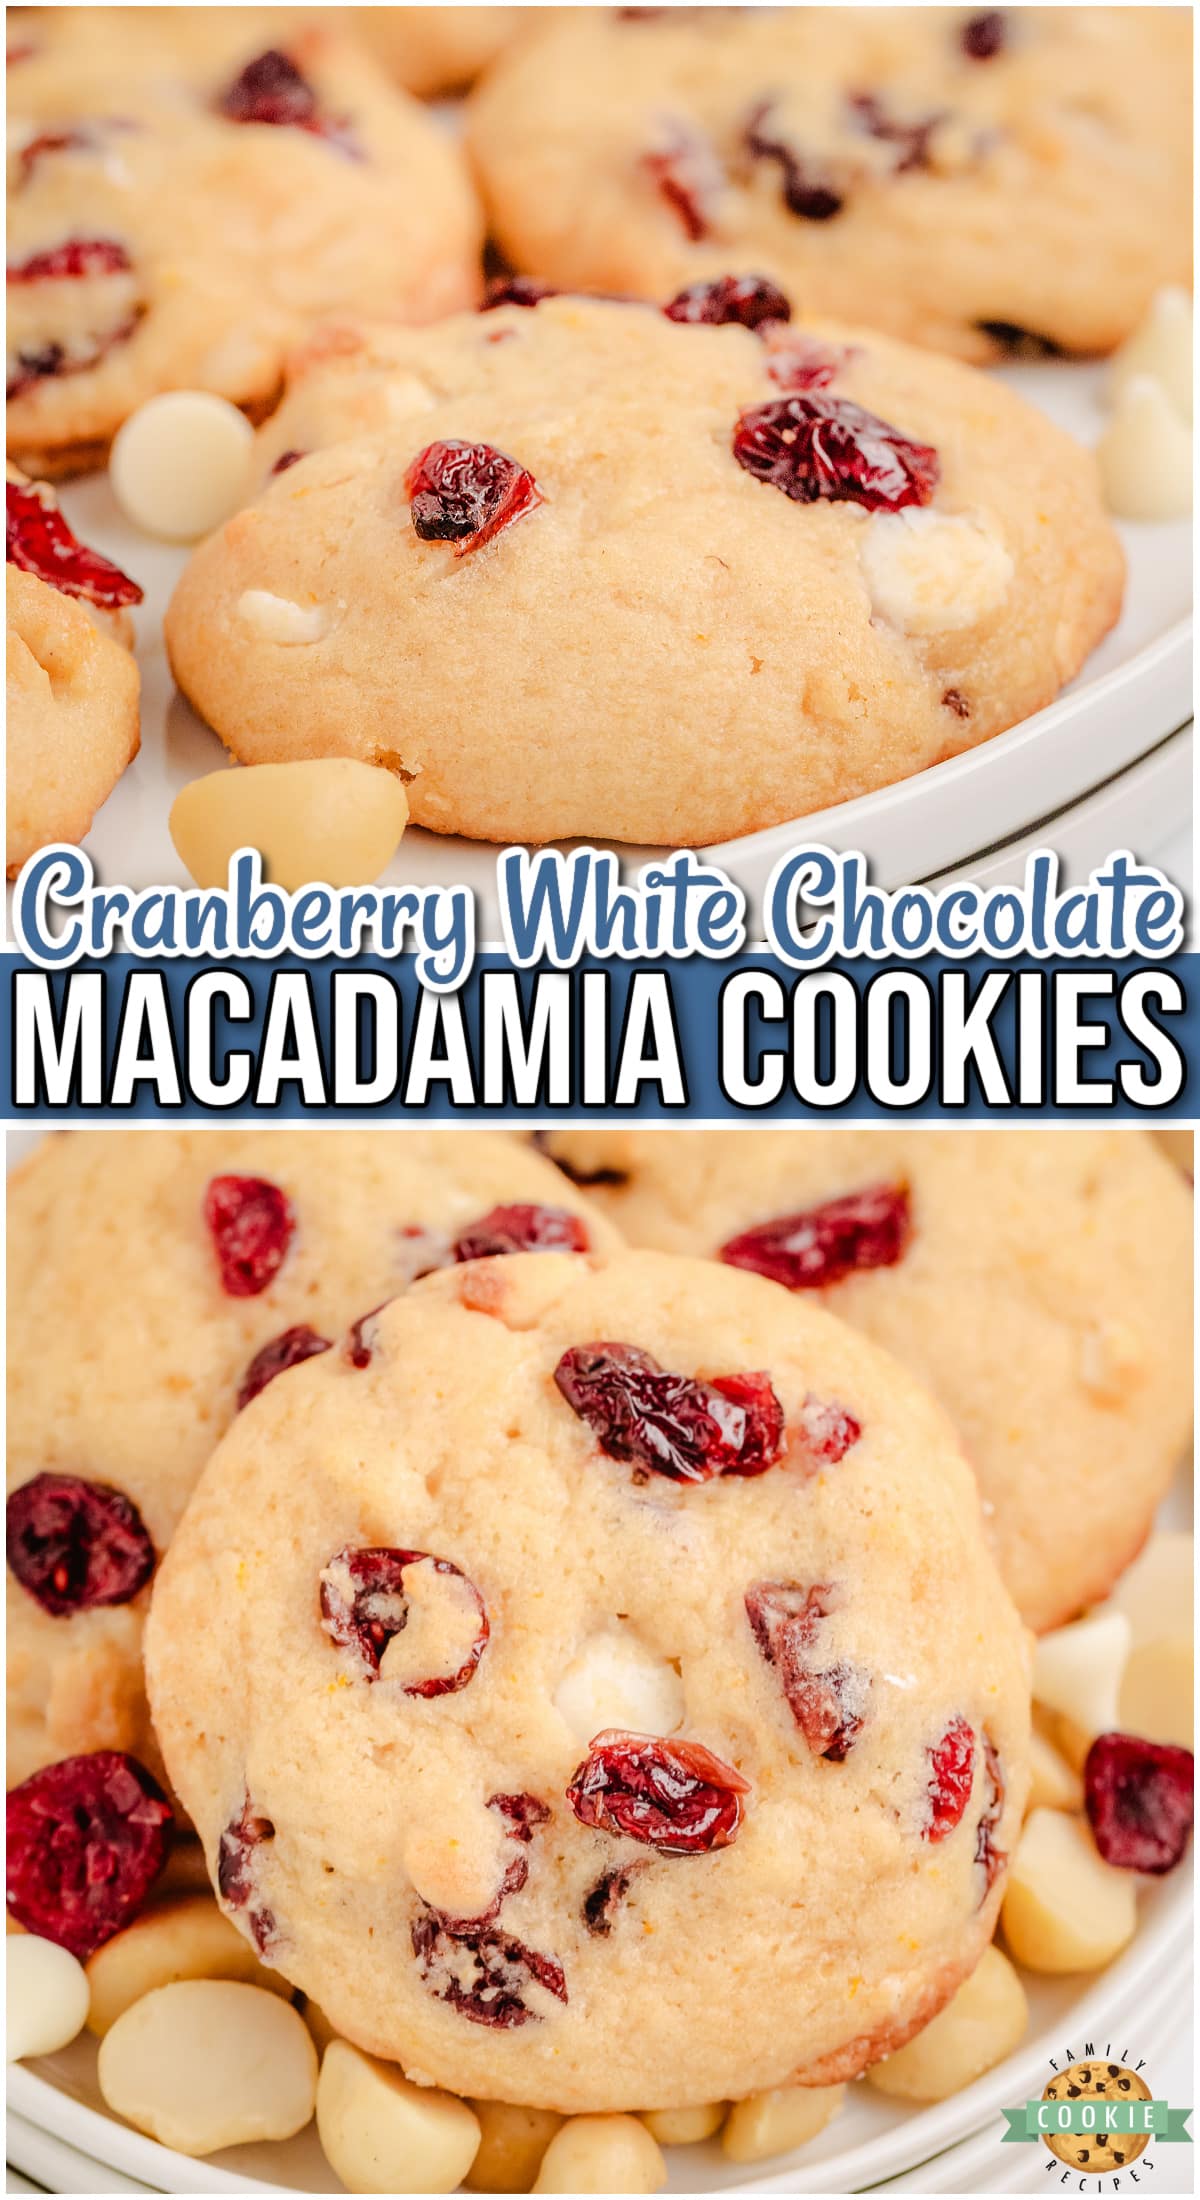 Cranberry Macadamia Nut Cookies is a delightful, festive cookie that combines tart cranberries, white chocolate & crunchy macadamia nuts!